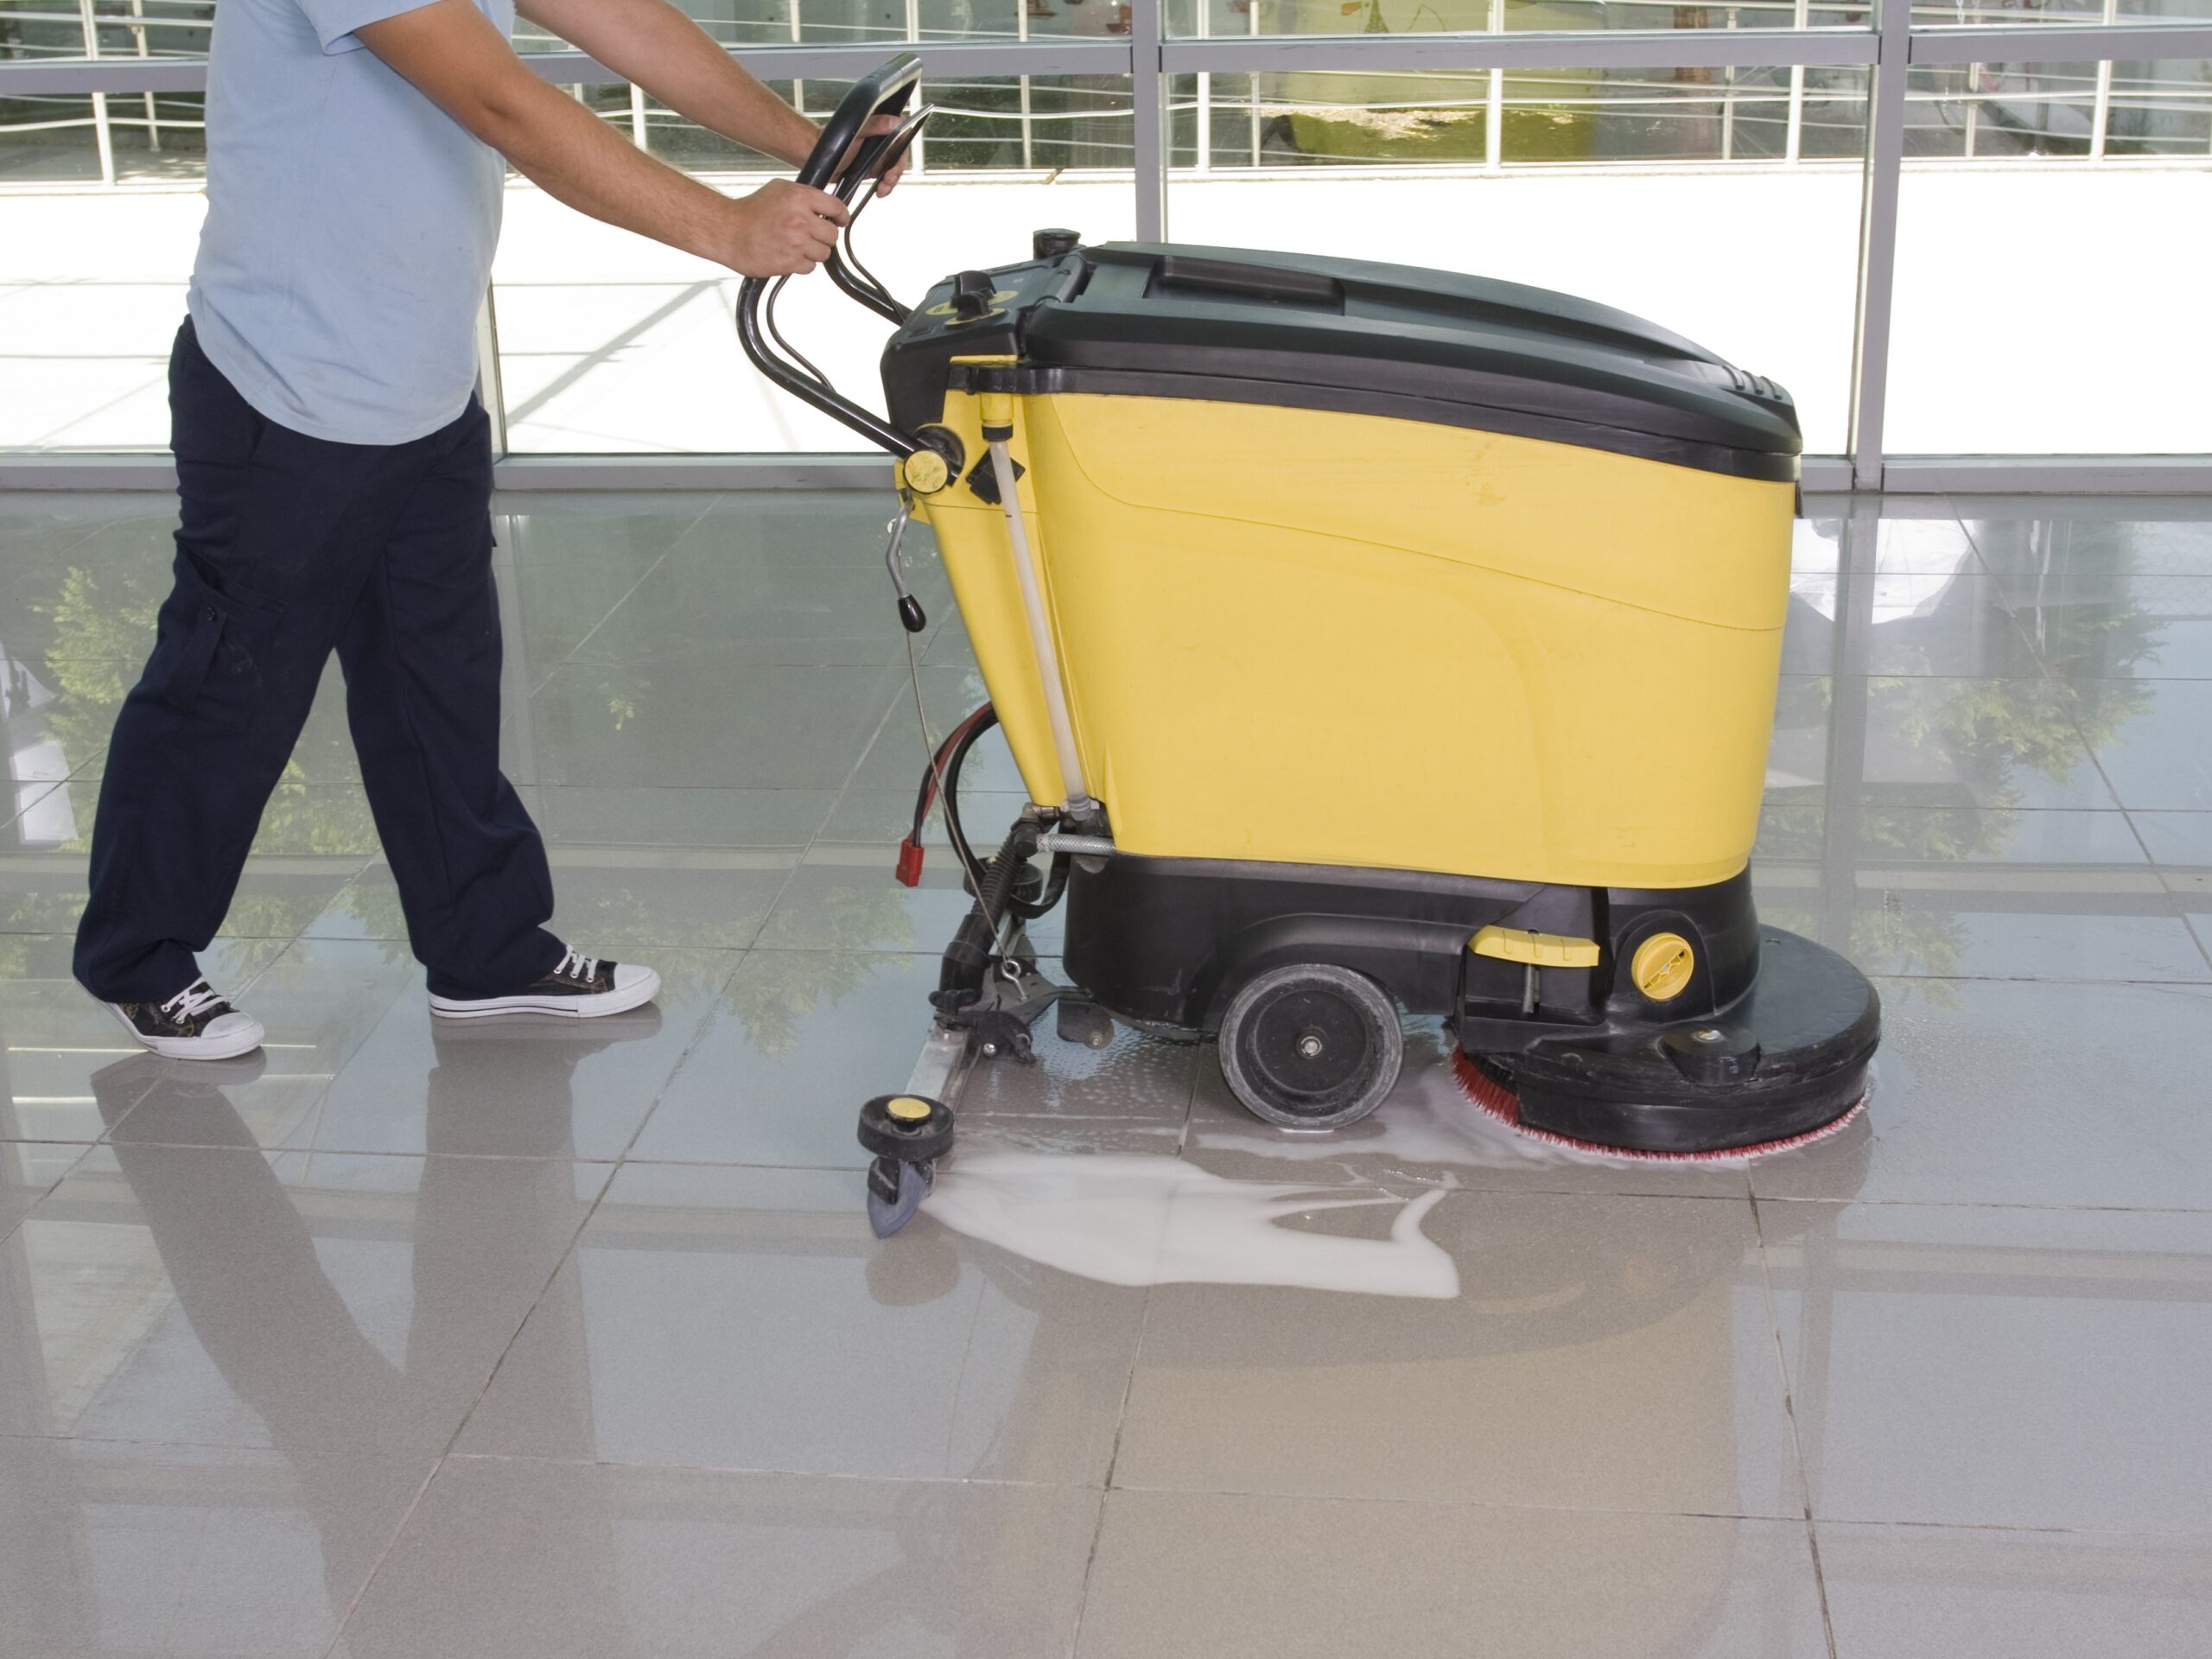 A Man worker cleaning the floor with scrubber machine. image